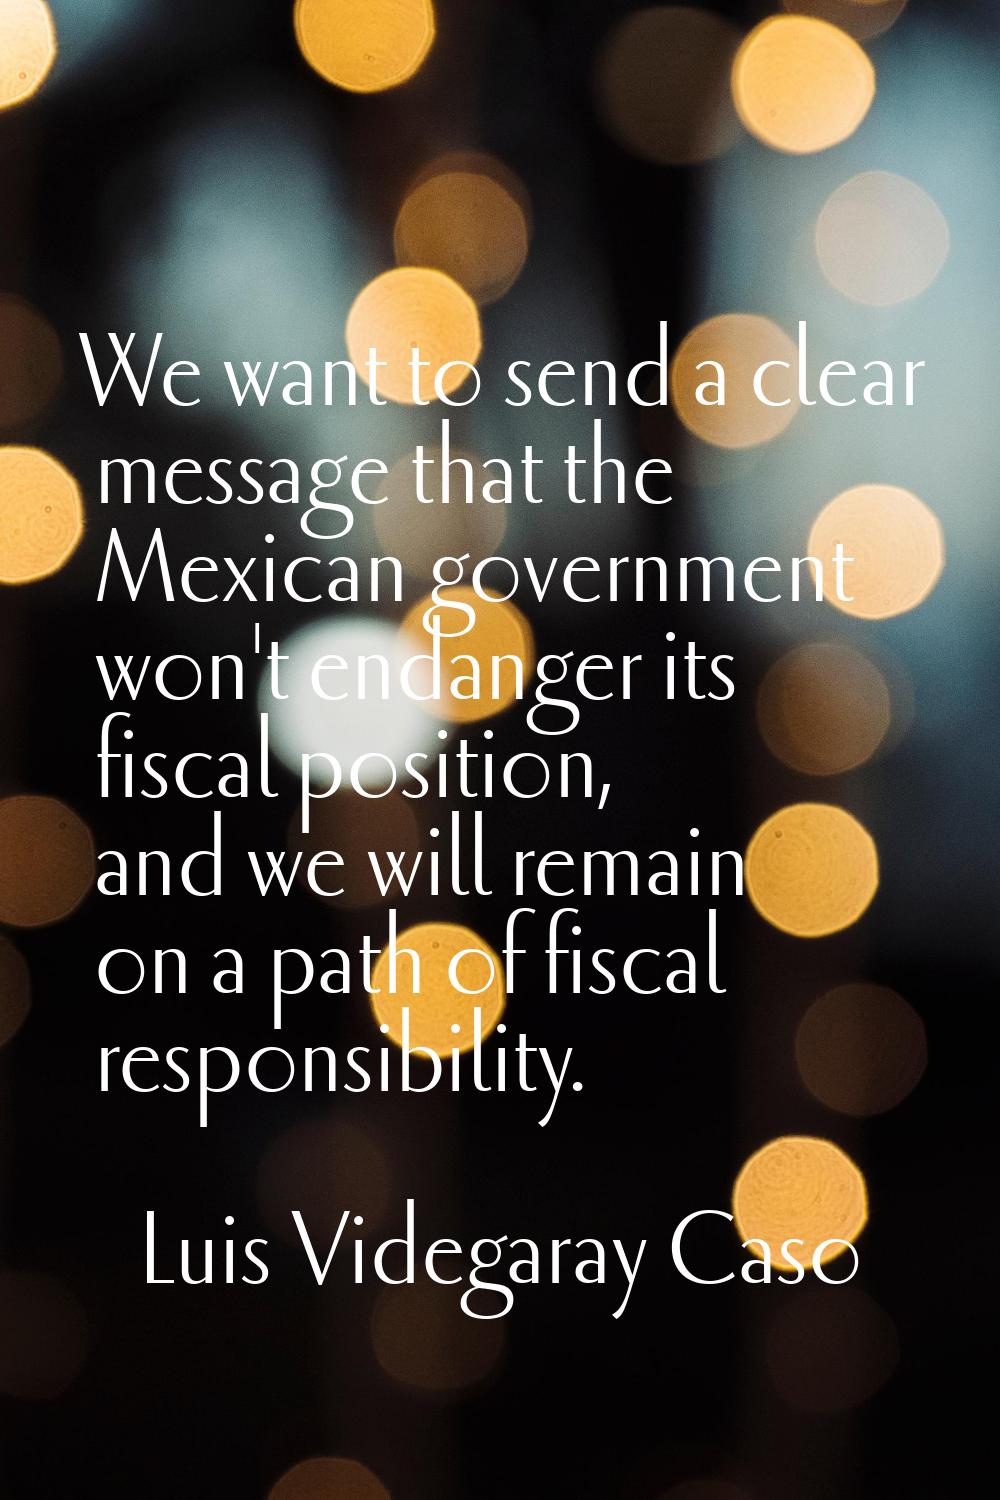 We want to send a clear message that the Mexican government won't endanger its fiscal position, and